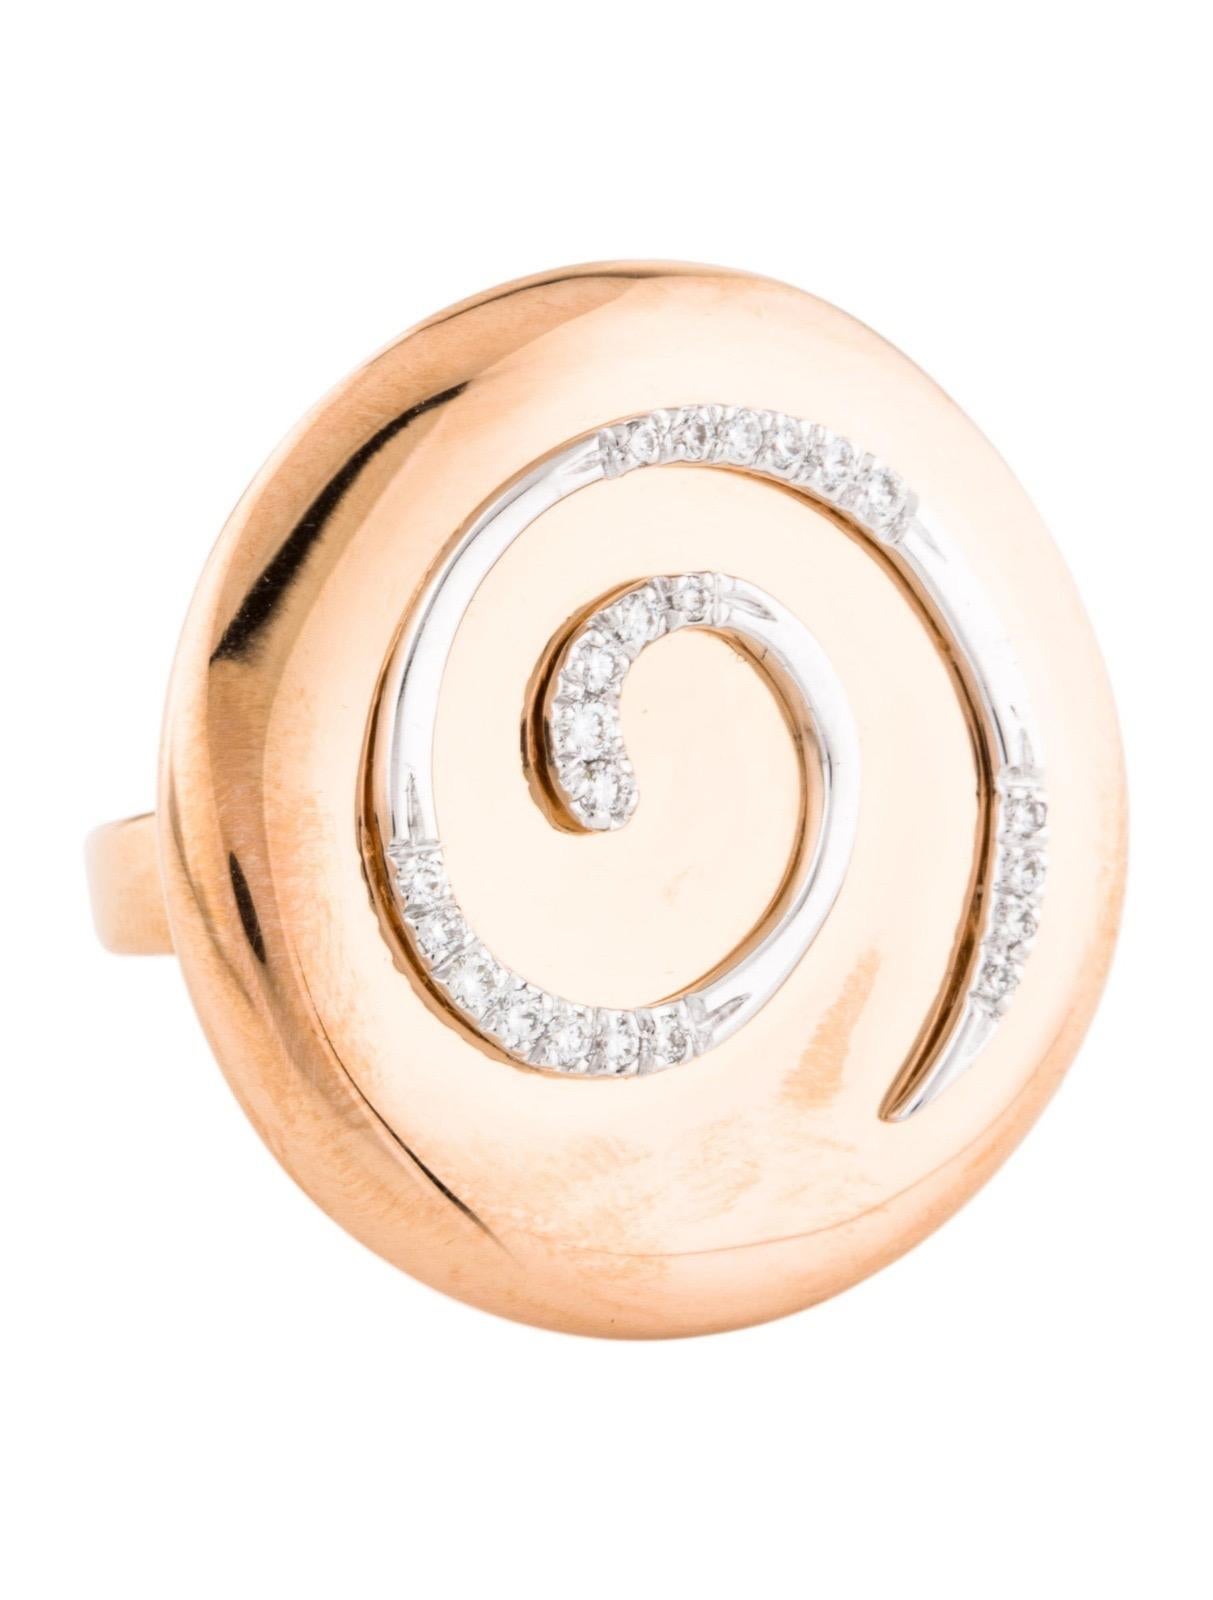 Rhodium-plated 18K rose and white gold Ponte Vecchio Gioielli Swirl cocktail ring featuring 0.21 carats of diamonds. 
Metal Finish: High Polish, Rhodium-Plated
Total Item Weight (g): 10.2
Stone Count: 22
Stone Shape: Round Brilliant
Color Grade: